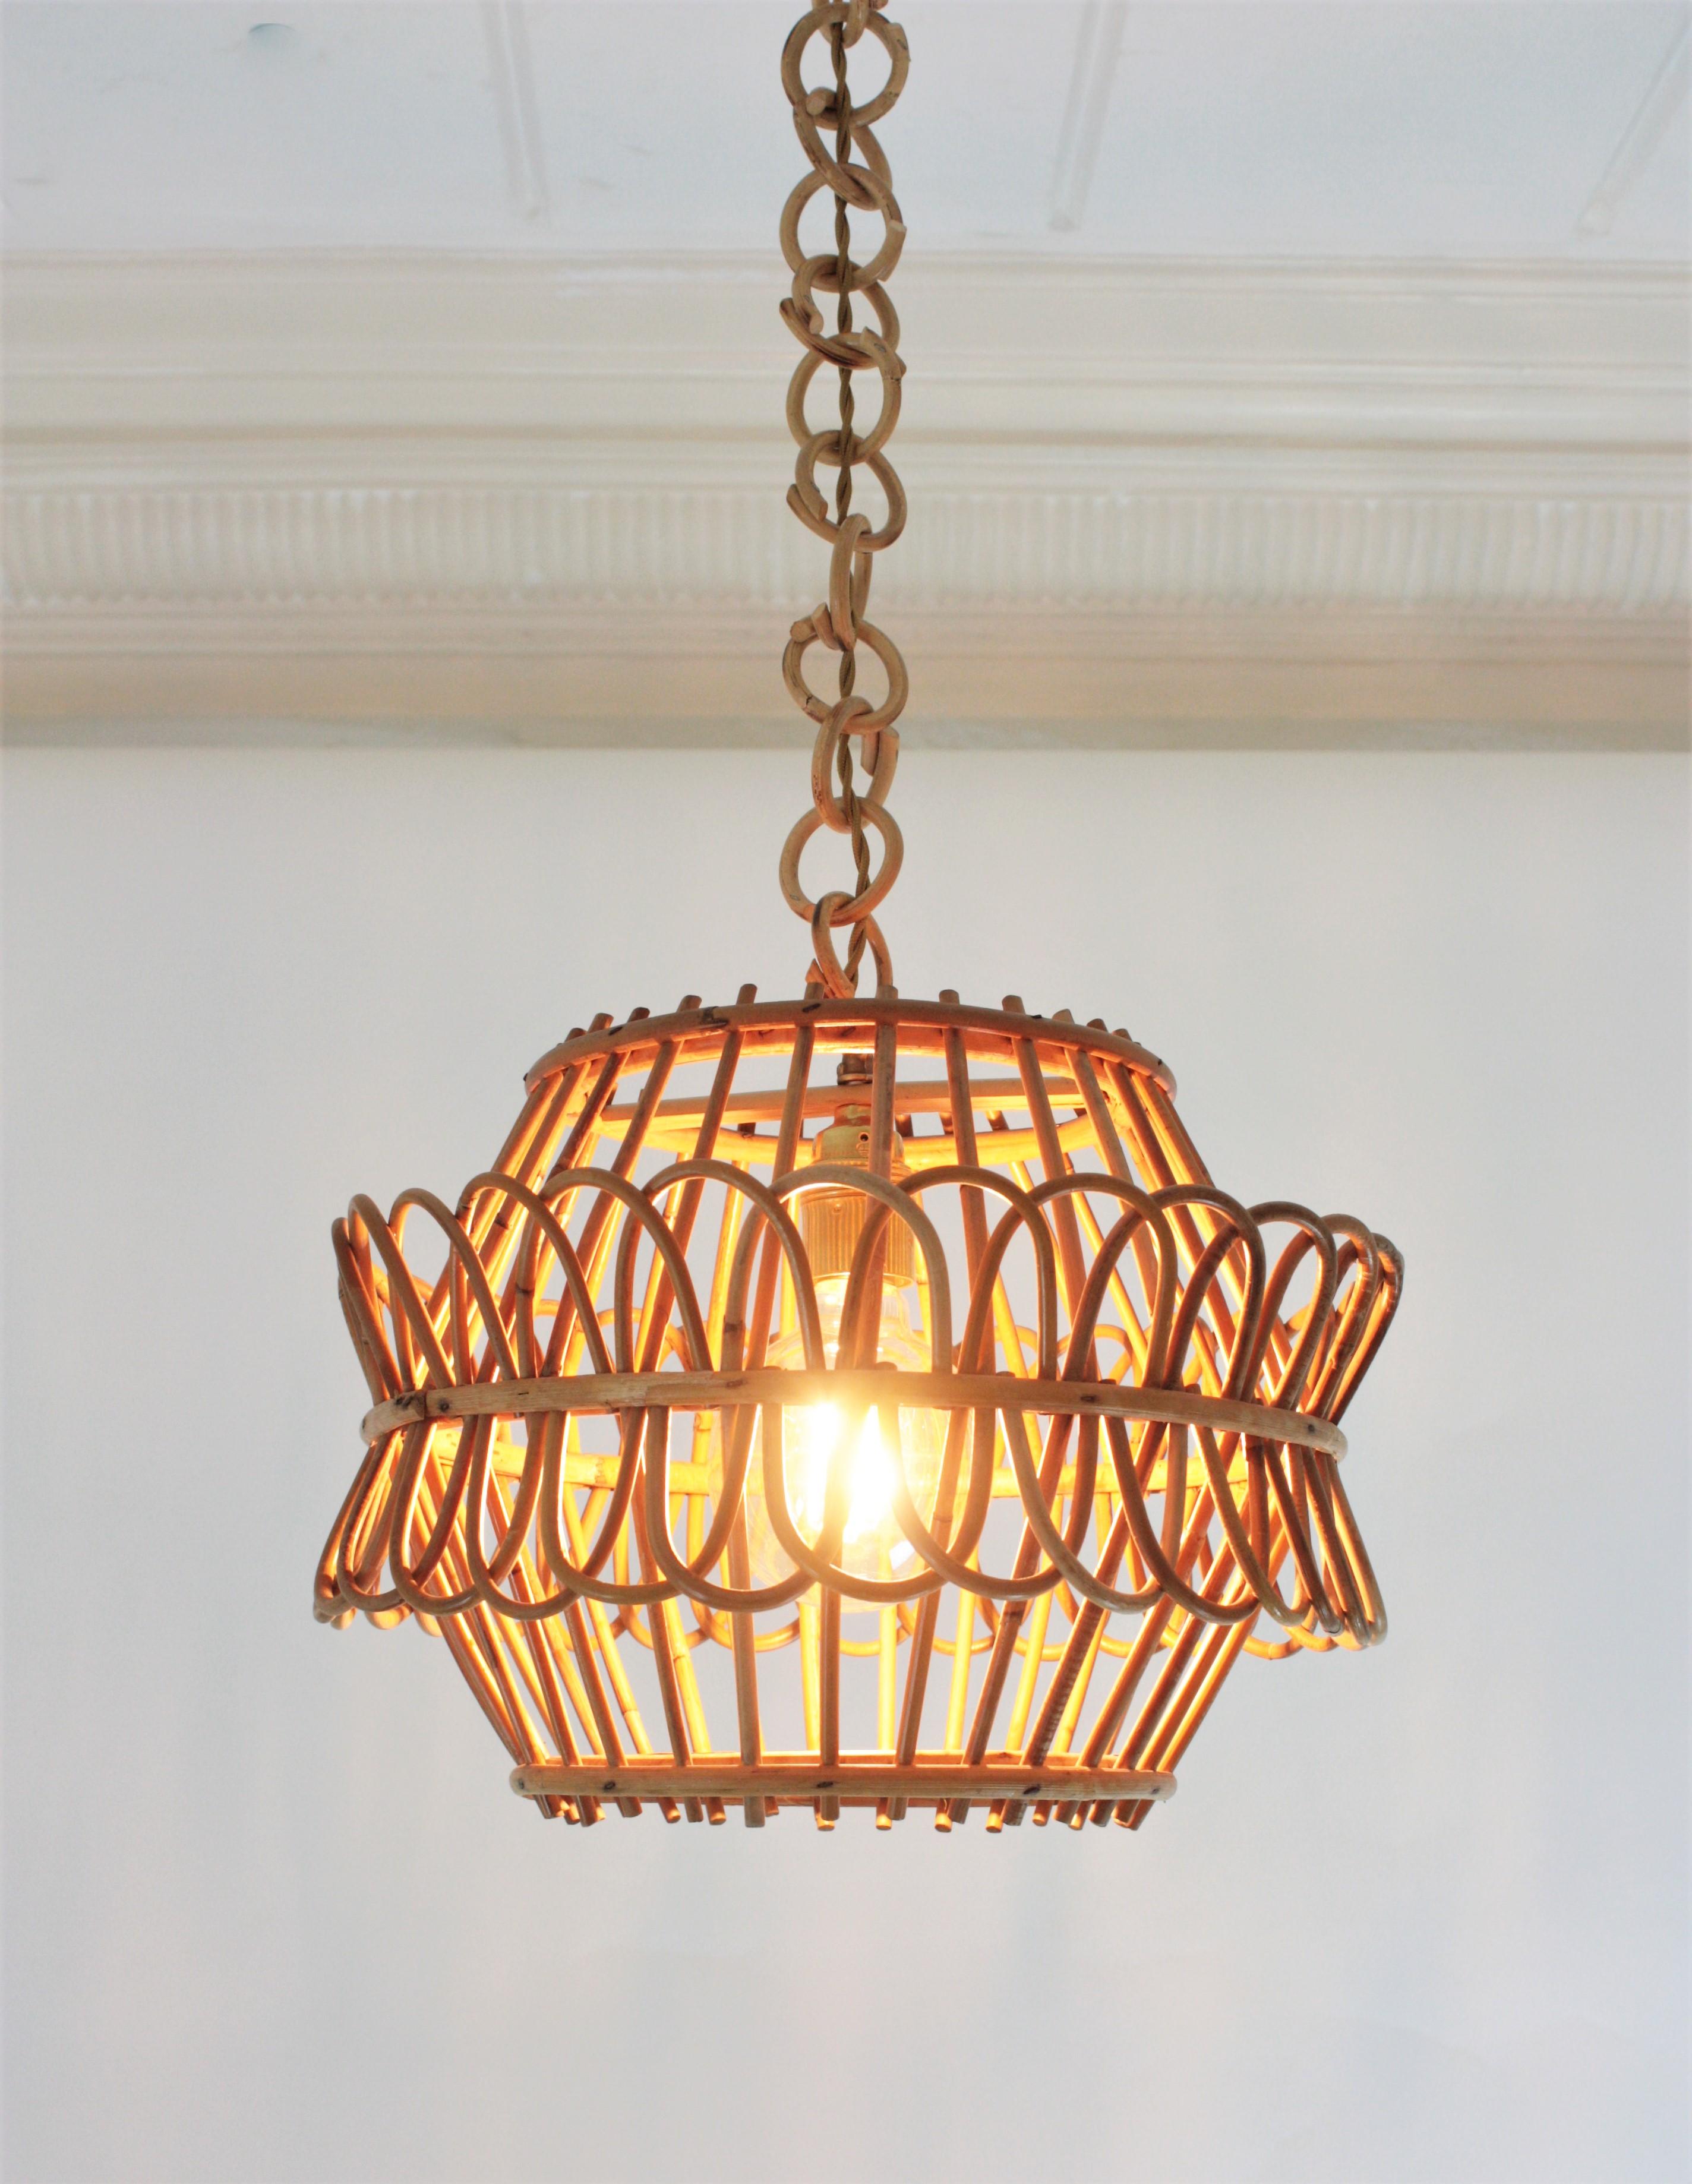 French Pendant Light or Lantern in Rattan, 1950s For Sale 1